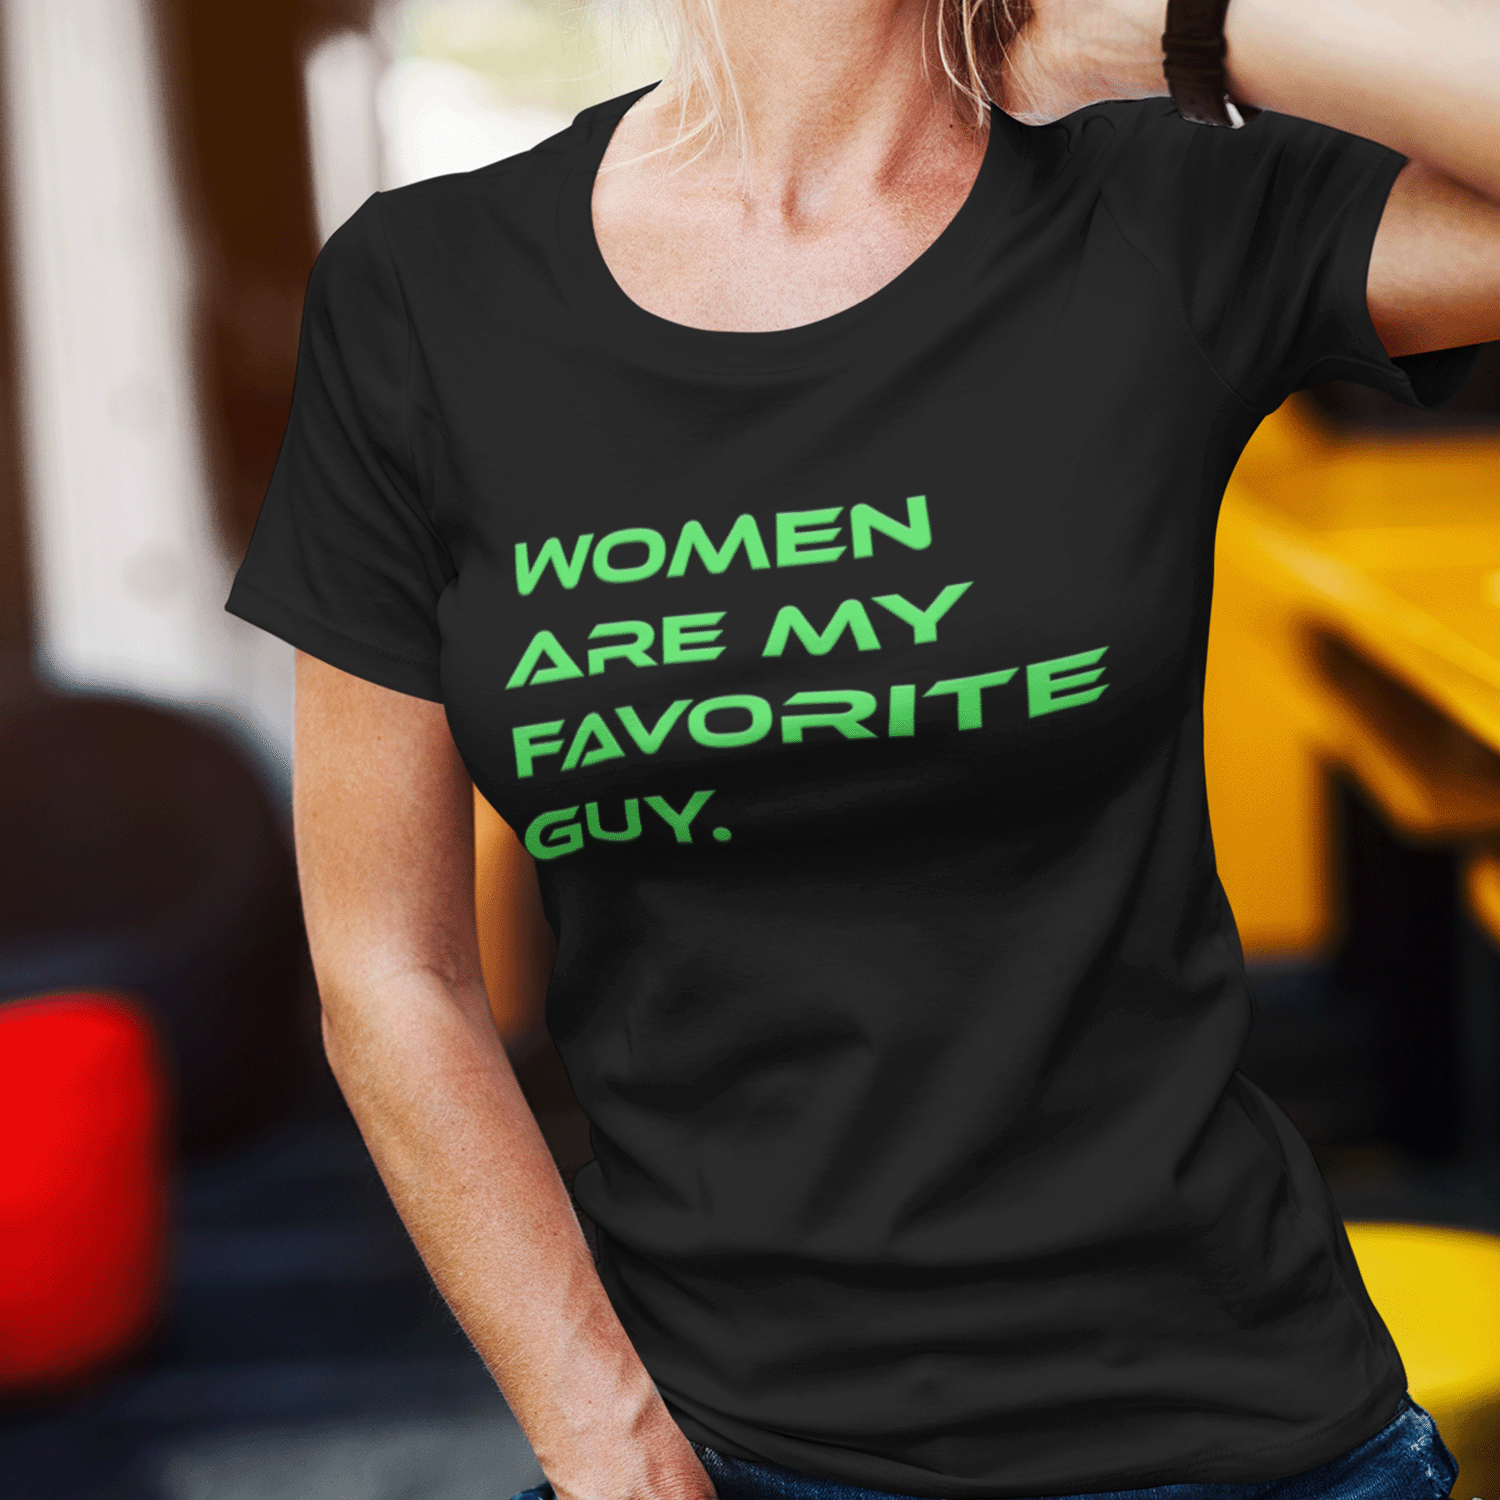 Women Are My Favorite Guy – T-Shirt Large